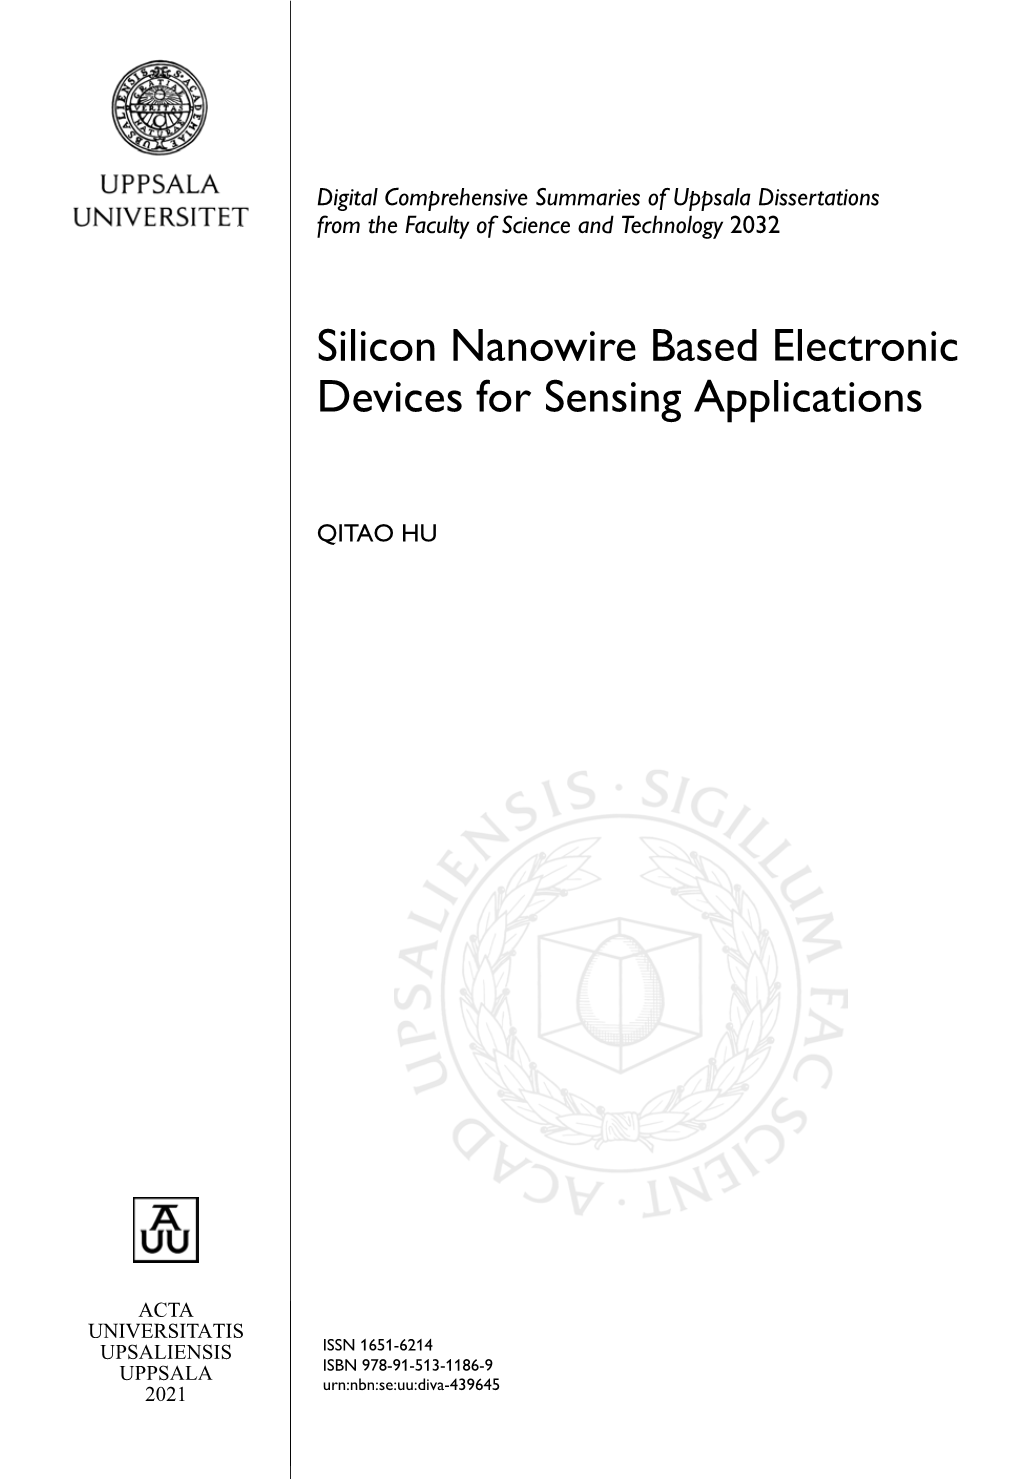 Silicon Nanowire Based Electronic Devices for Sensing Applications